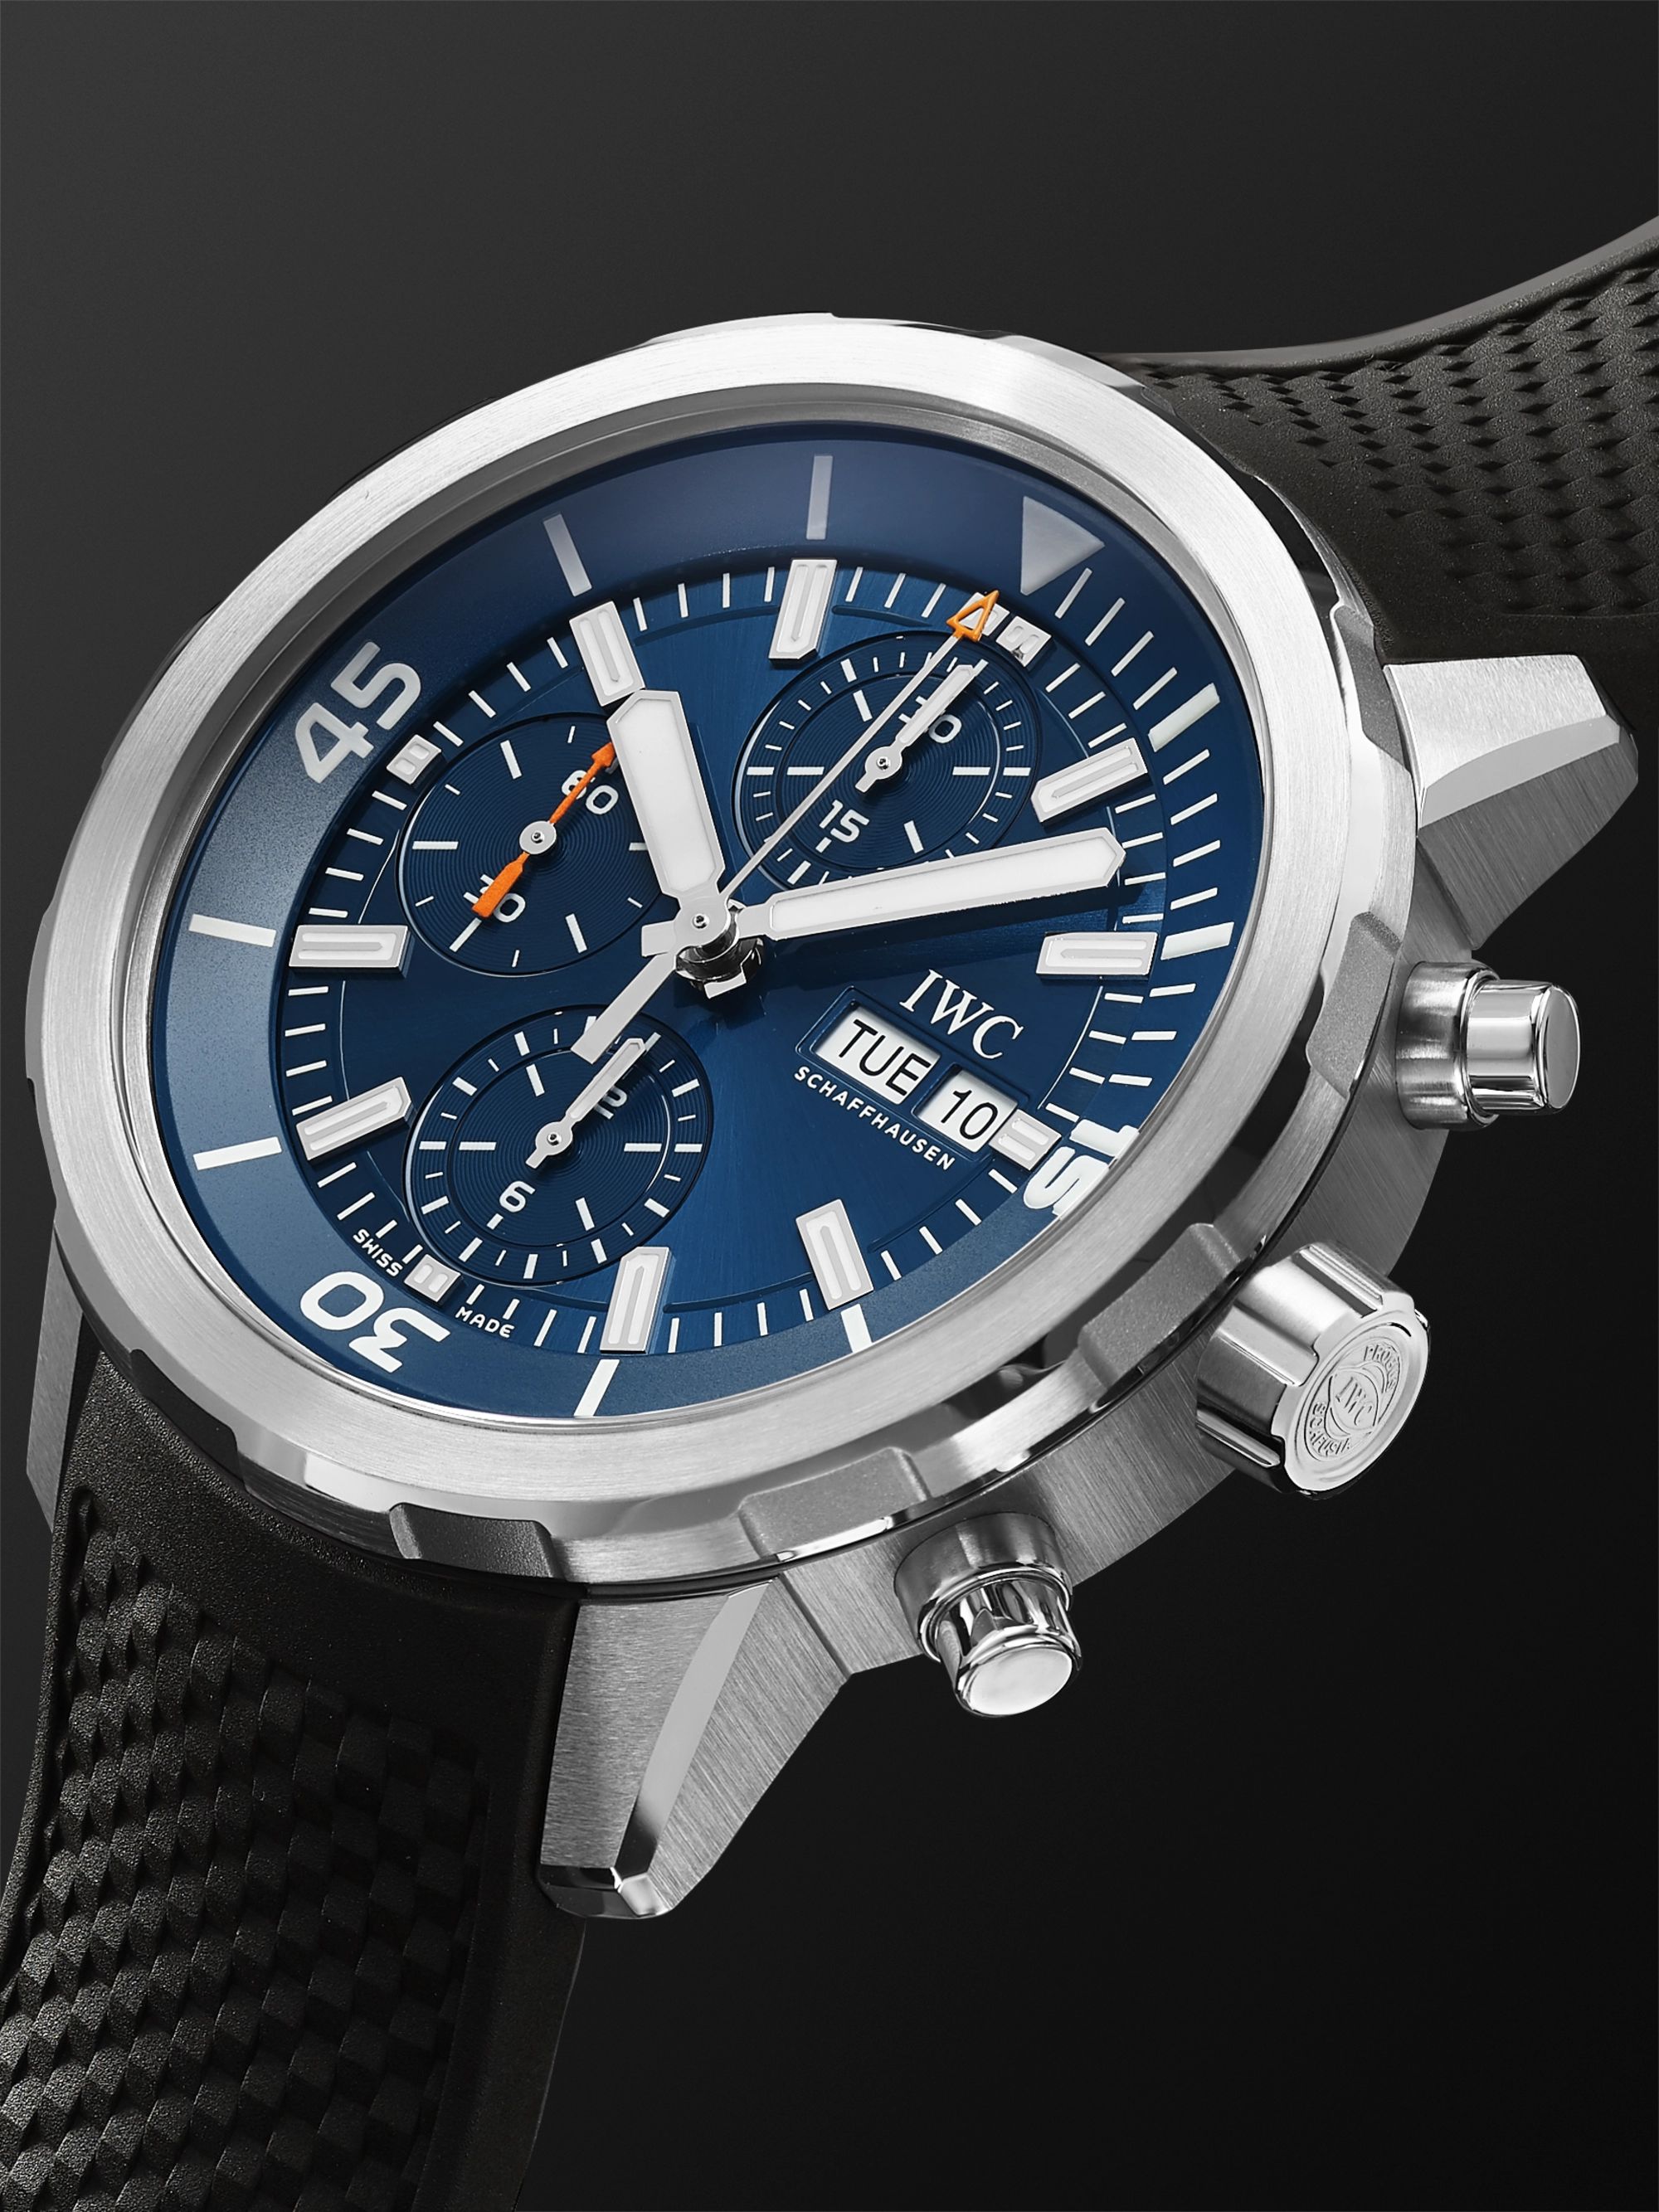 IWC SCHAFFHAUSEN Aquatimer Expedition Jacques-Yves Cousteau Edition Automatic Chronograph 44mm Stainless Steel and Rubber Watch, Ref. No. IW376805